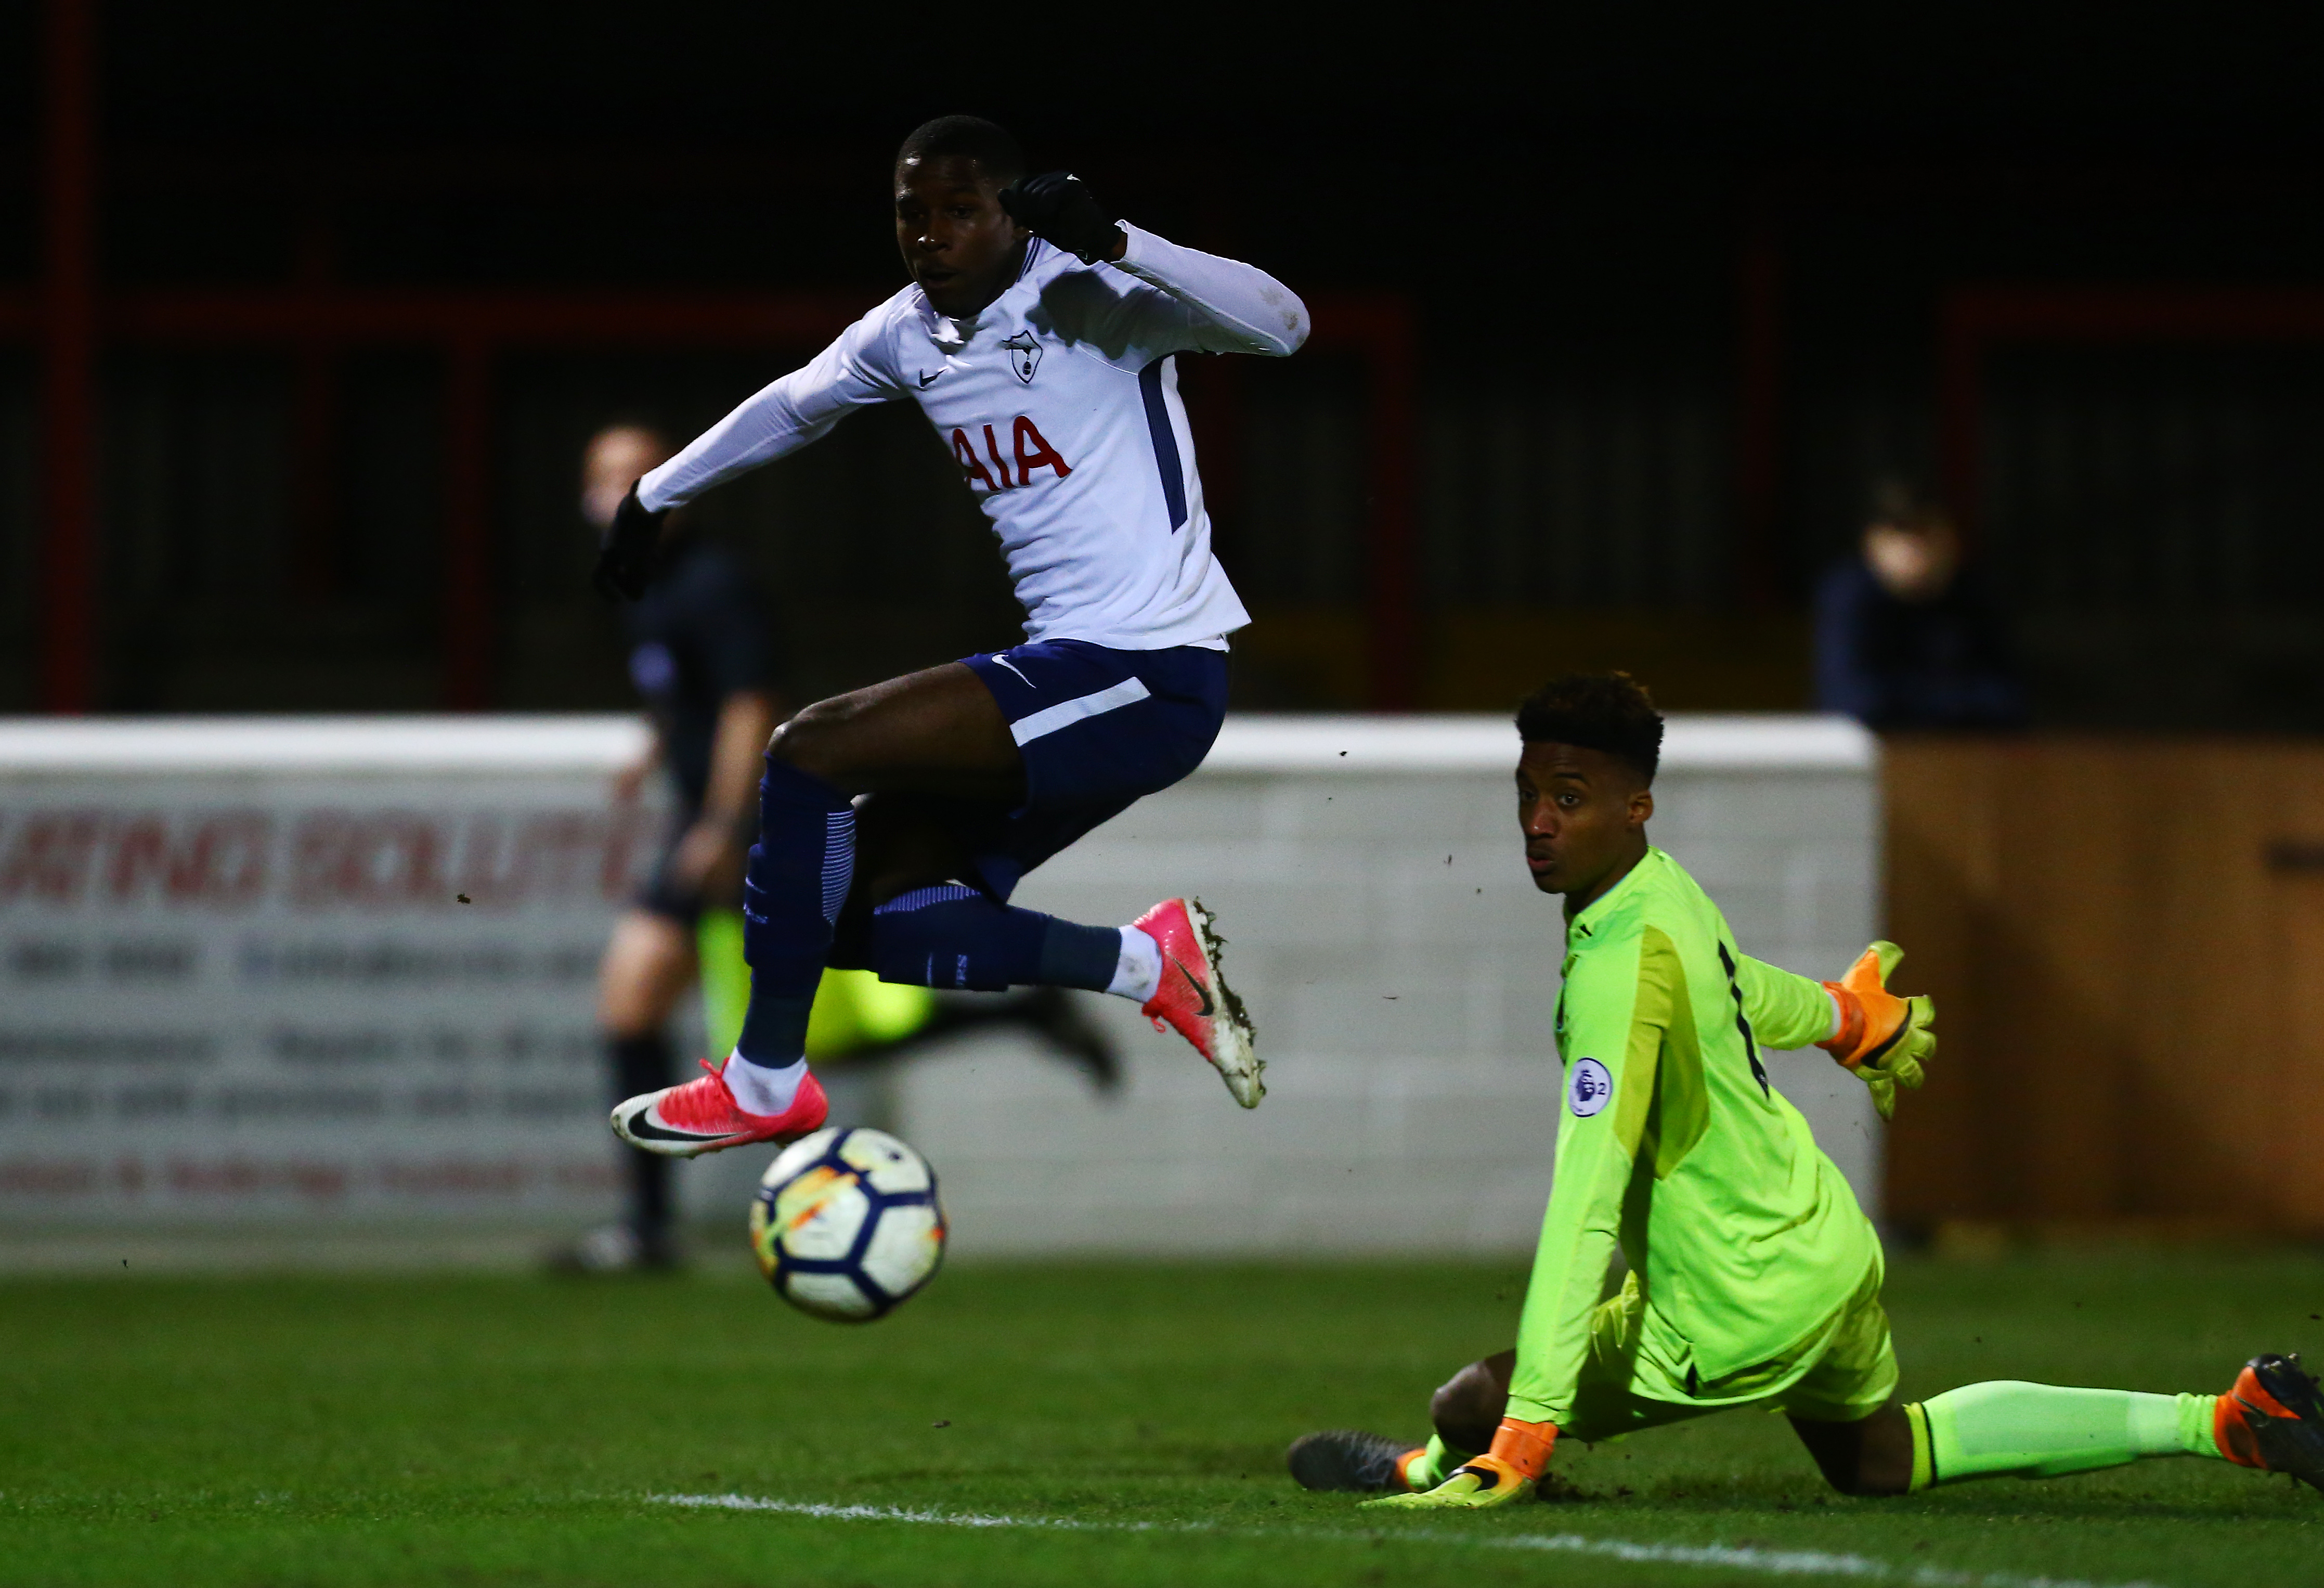 DAGENHAM, ENGLAND - FEBRUARY 12:  Shilow Tracey of Tottenham scores his sides second goal past Nathan Trott of West Ham during the Premier League 2 match between West Ham United and Tottenham Hotspur at Chigwell Construction Stadium on February 12, 2018 in Dagenham, England.  (Photo by Jordan Mansfield/Getty Images)